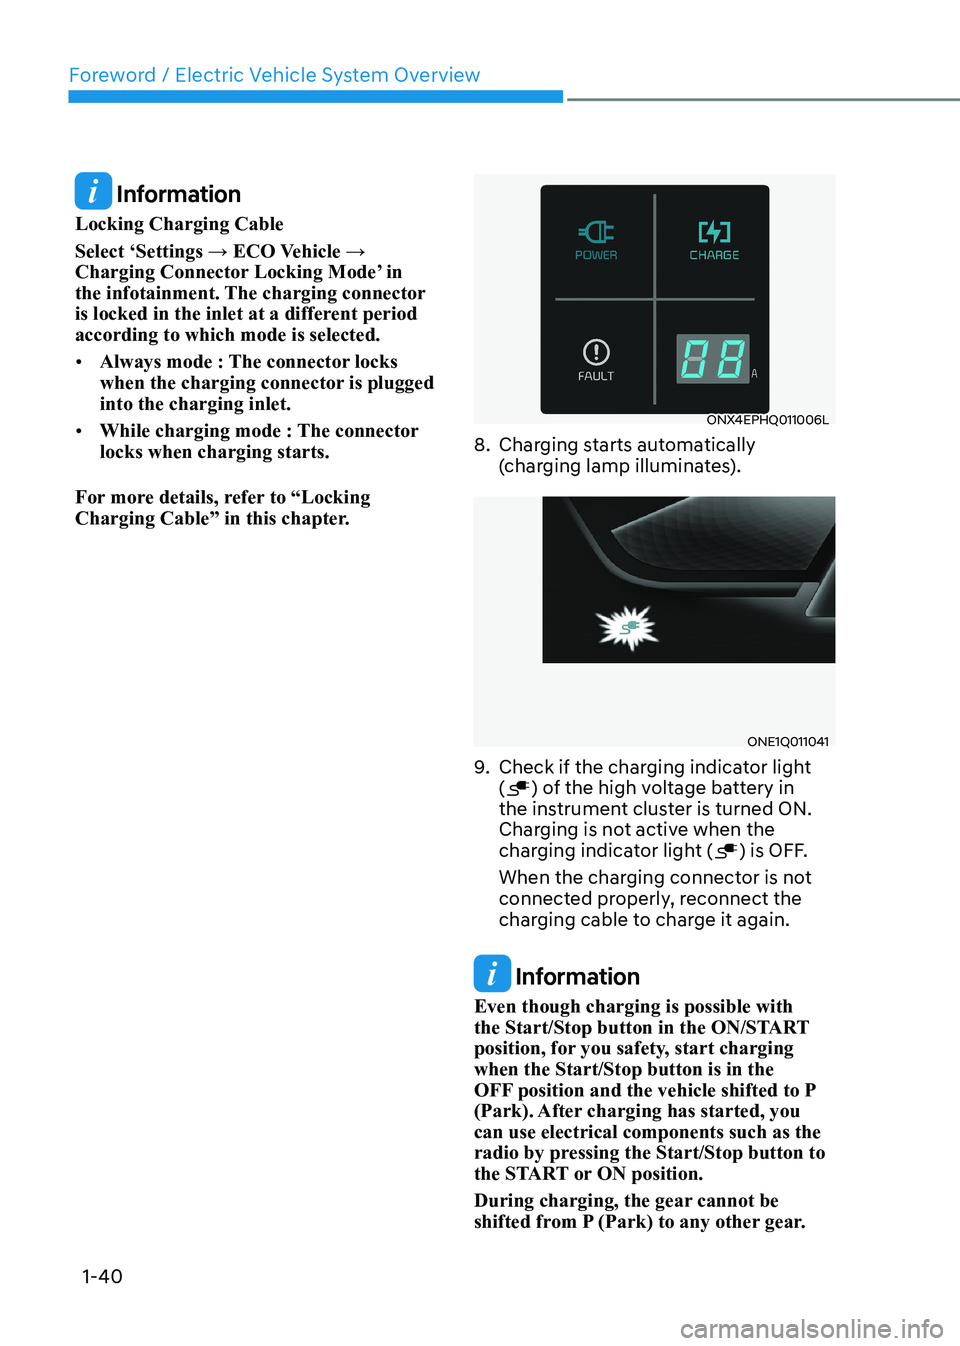 HYUNDAI IONIQ 5 2023 Service Manual Foreword / Electric Vehicle System Overview
1-40
 Information
Locking Charging Cable 
Select ‘Settings → ECO Vehicle →  
Charging Connector Locking Mode’ in 
the infotainment. The charging con